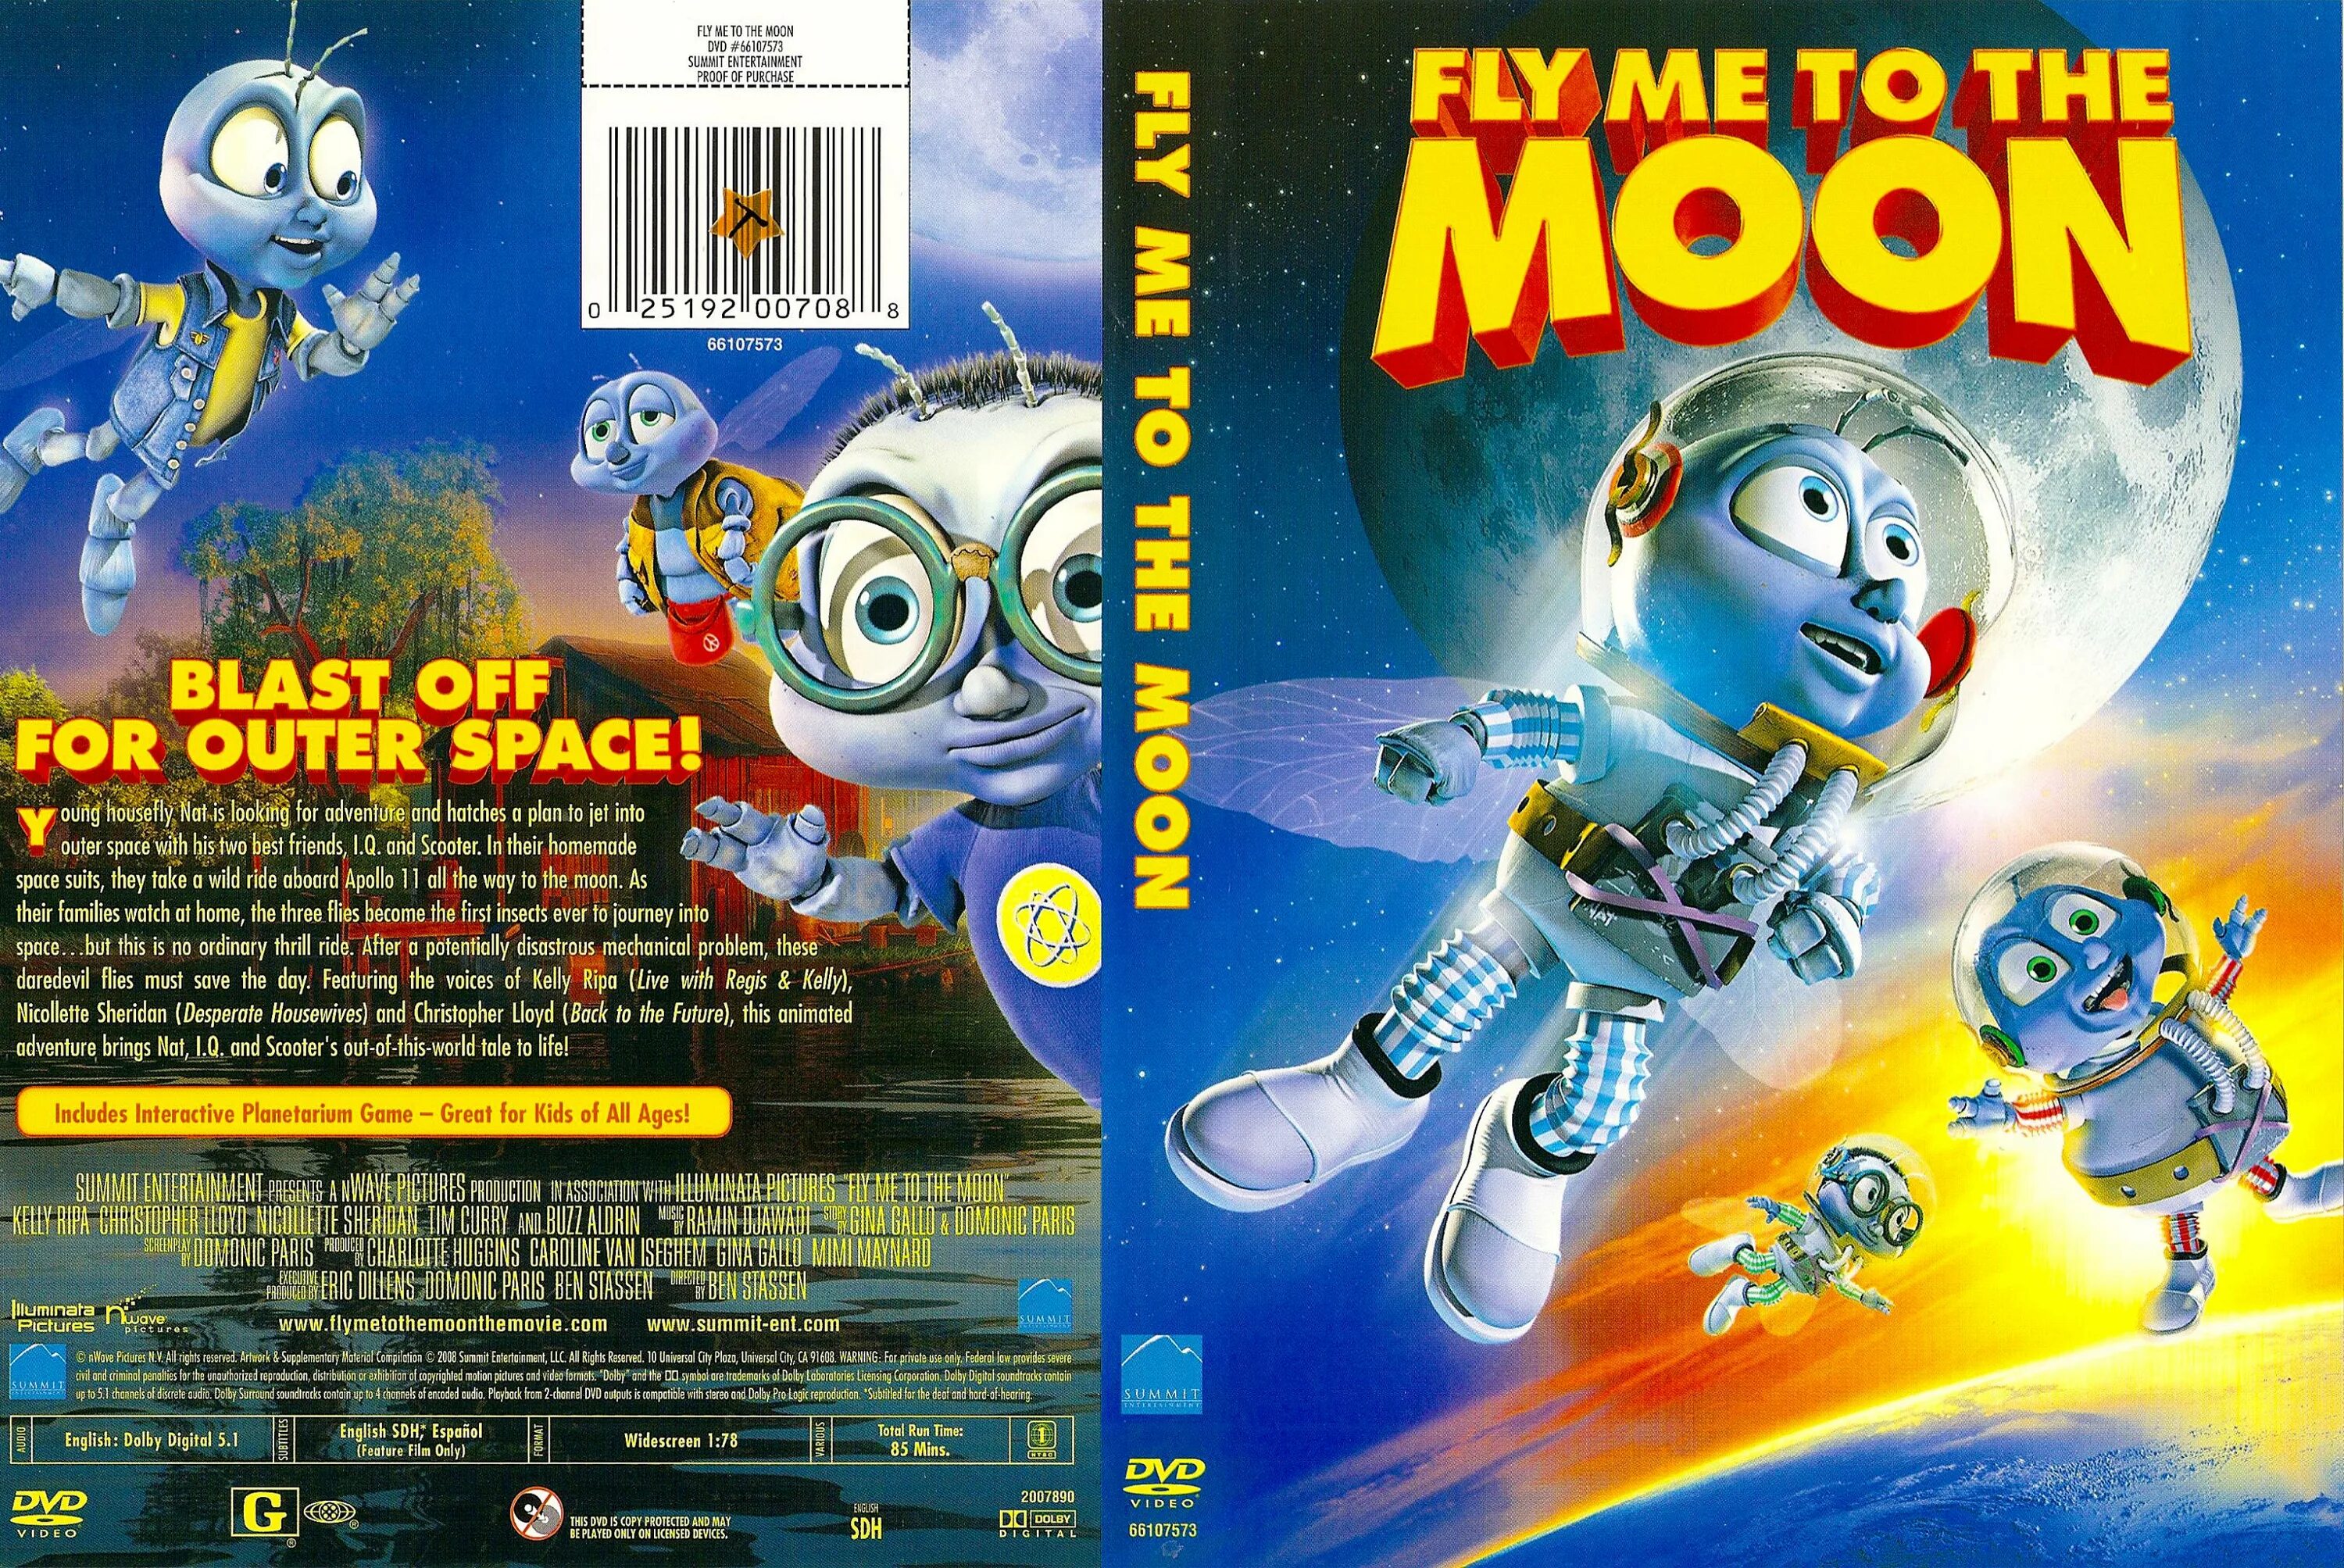 Angelie fly to the moon. Fly me to the Moon 2008. Fly to the Moon игра. Диск DVD Мухнём на луну. Fly me to the Moon игра.